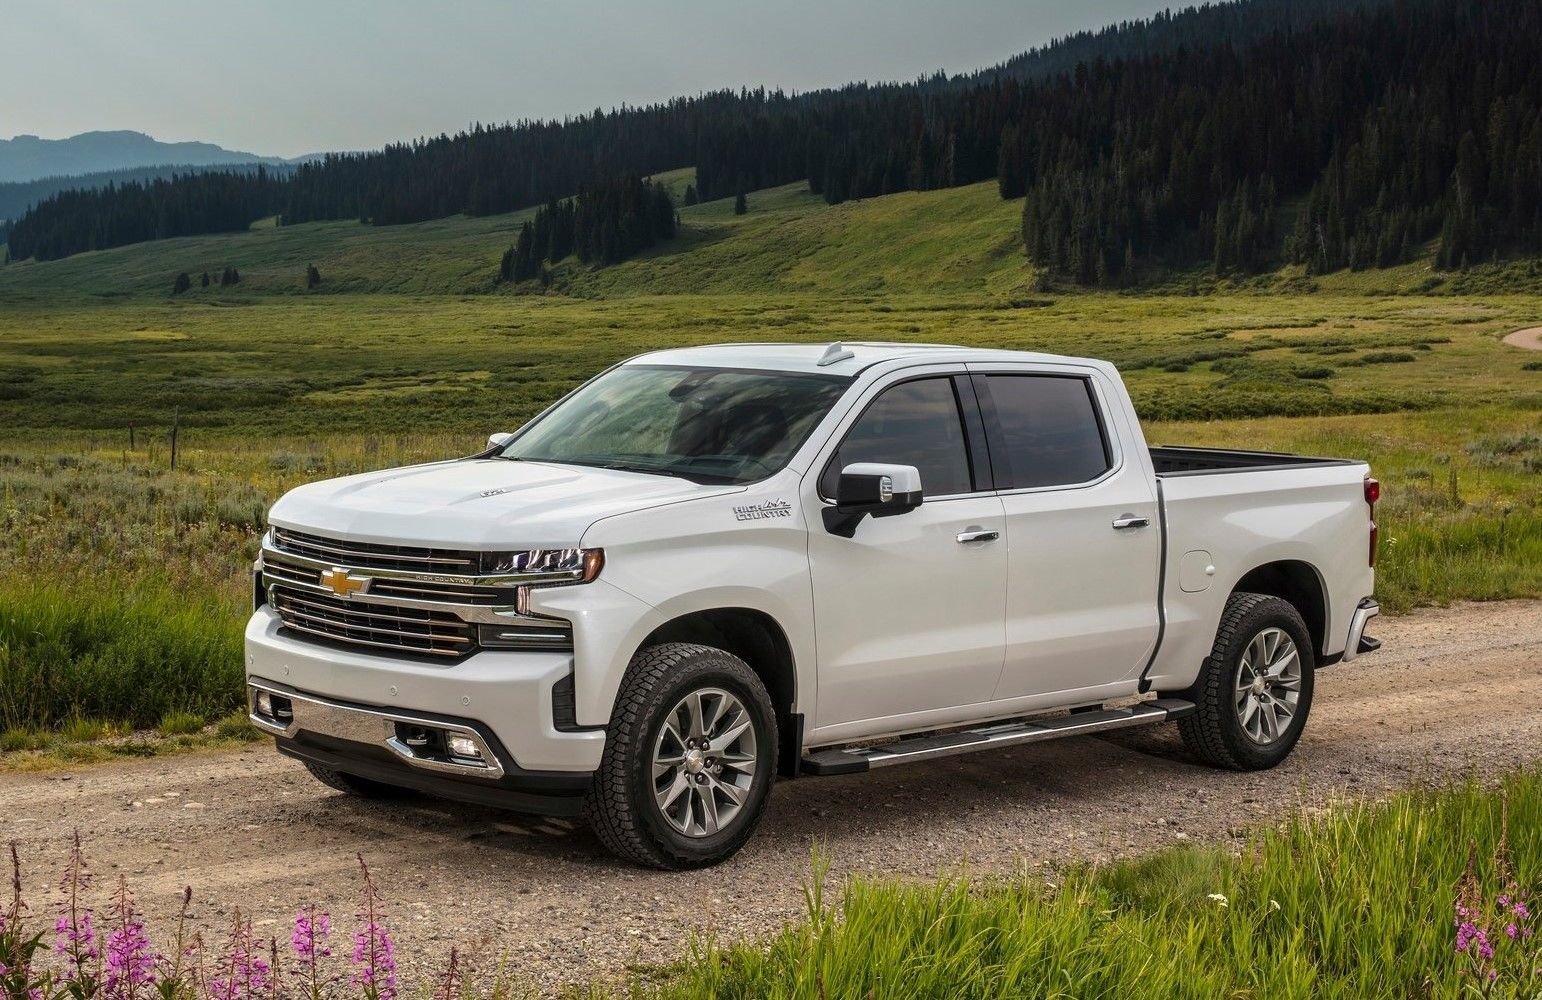 The 2019 Chevy Silverado: A Truck for All Types of Work